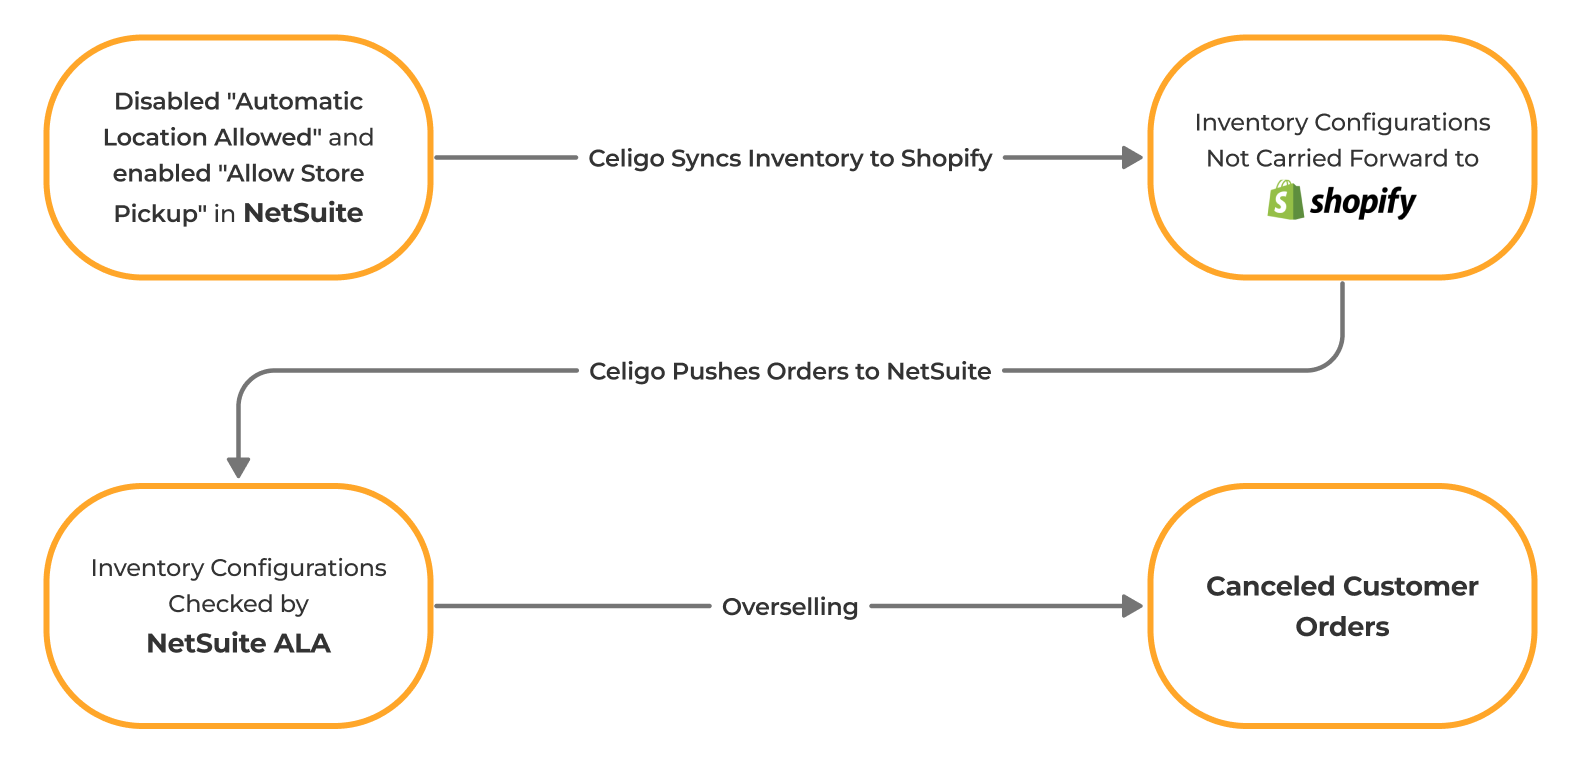 Impact of not carrying forward Inventory Configurations to Shopify